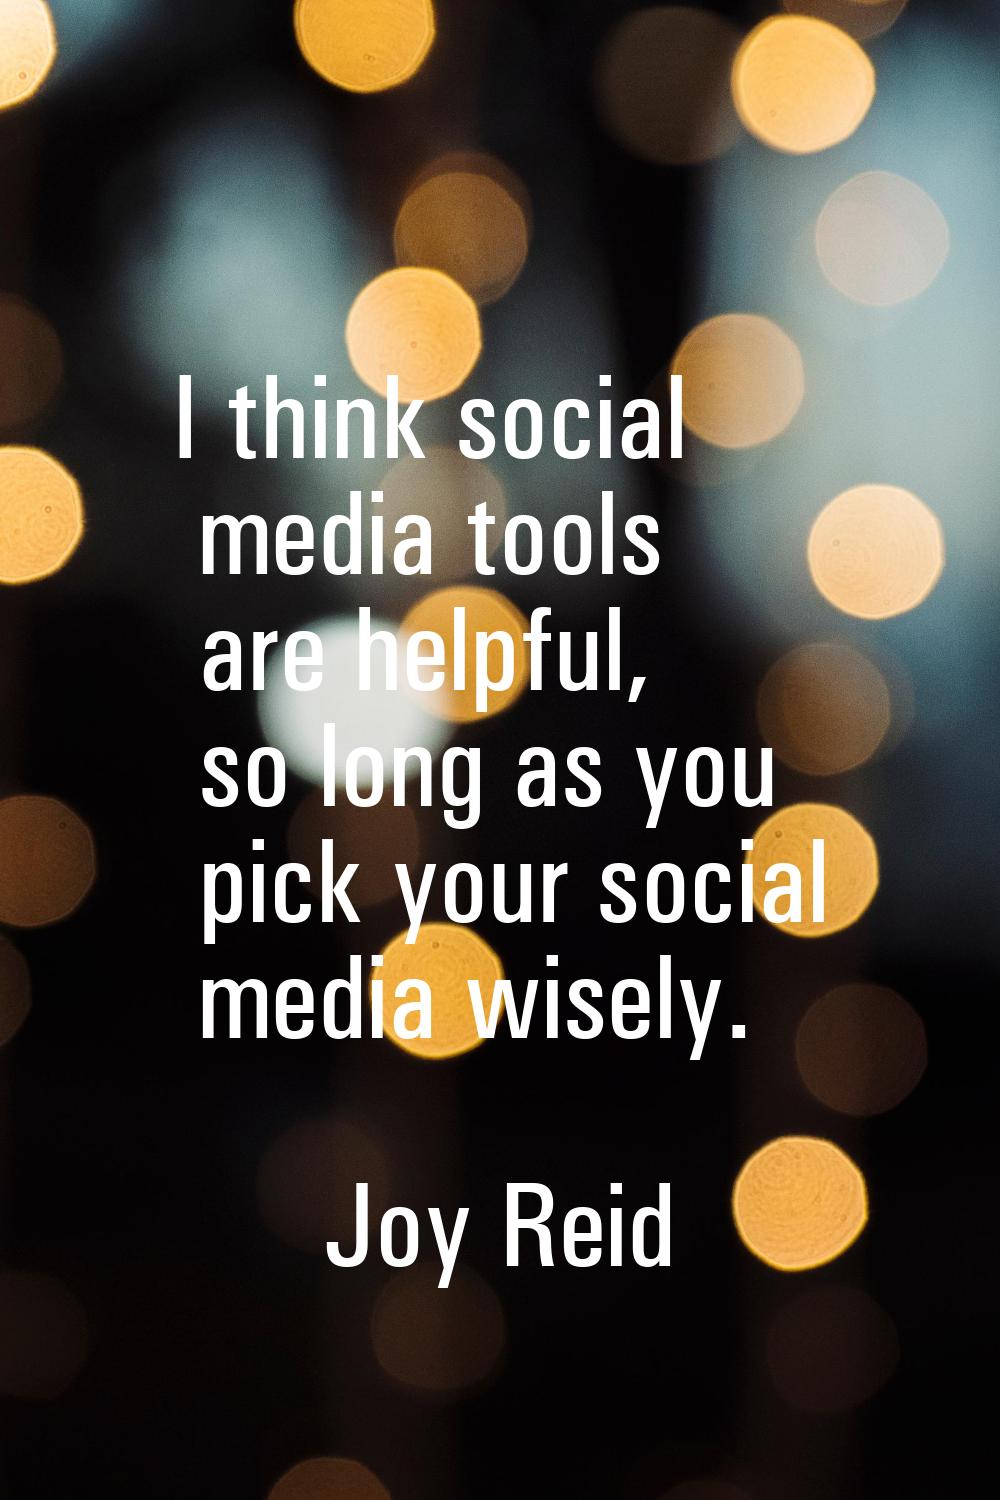 I think social media tools are helpful, so long as you pick your social media wisely.